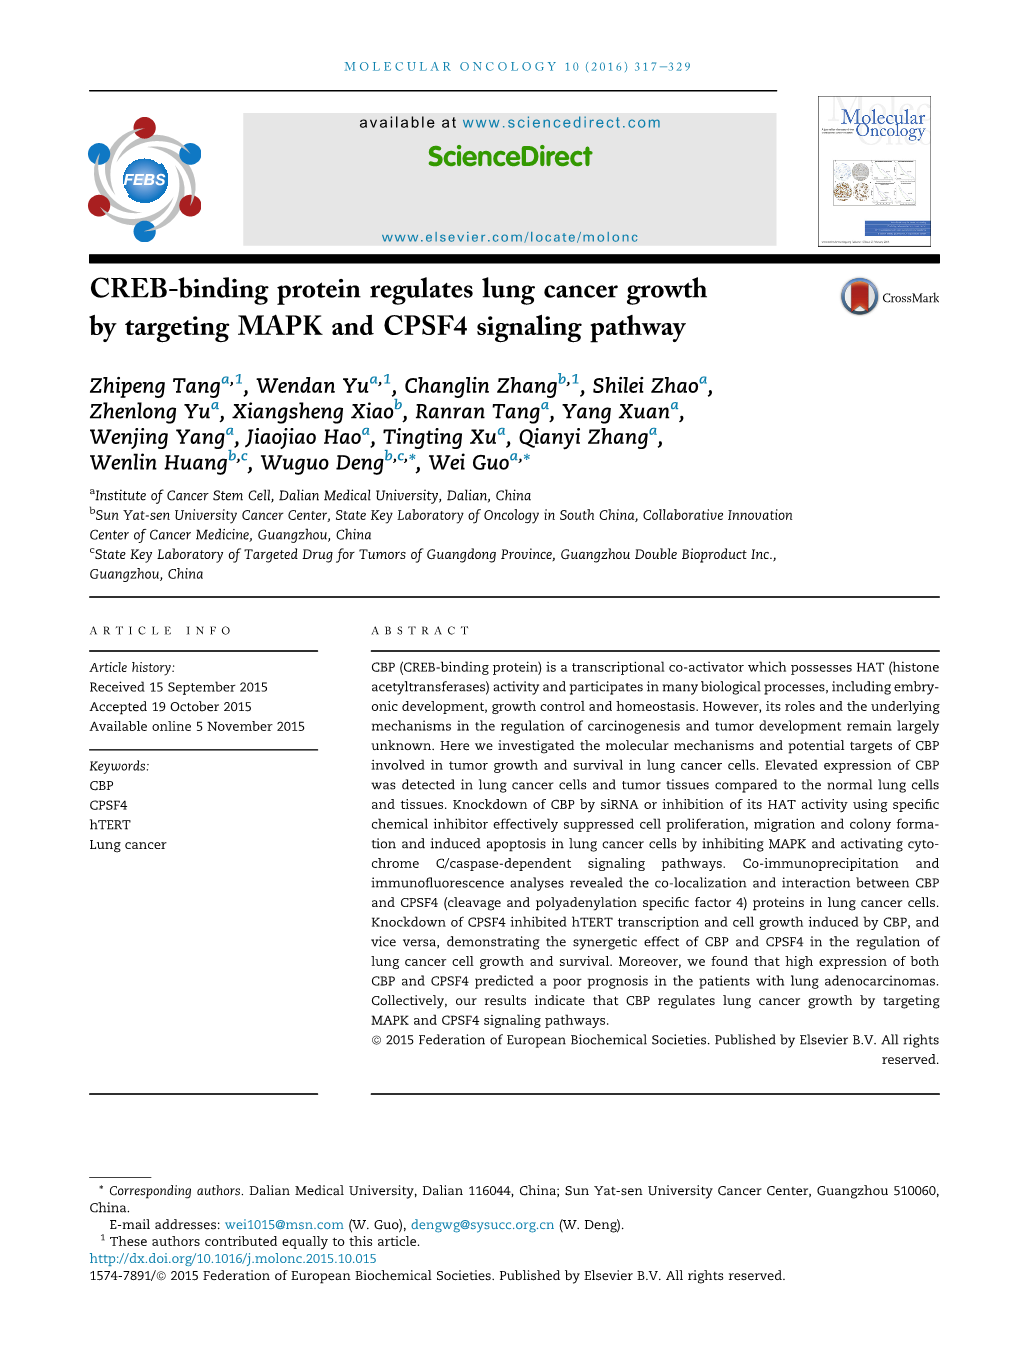 CREB-Binding Protein Regulates Lung Cancer Growth by Targeting MAPK and CPSF4 Signaling Pathway